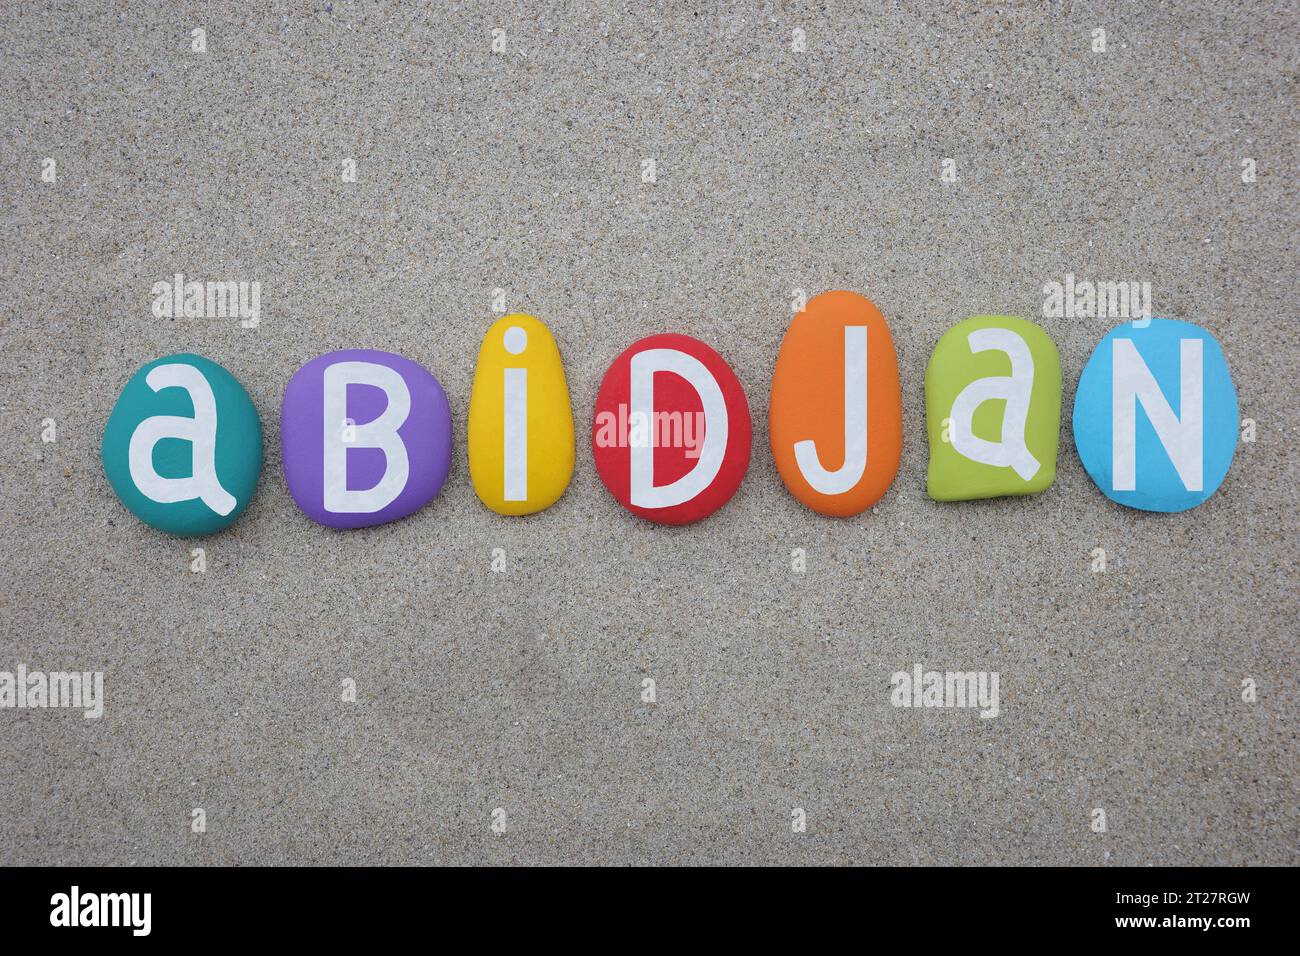 Abidjan, the largest city and the economic capital of the Ivory Coast, souvenir or logo composed with hand painted multi colored stone letters over be Stock Photo